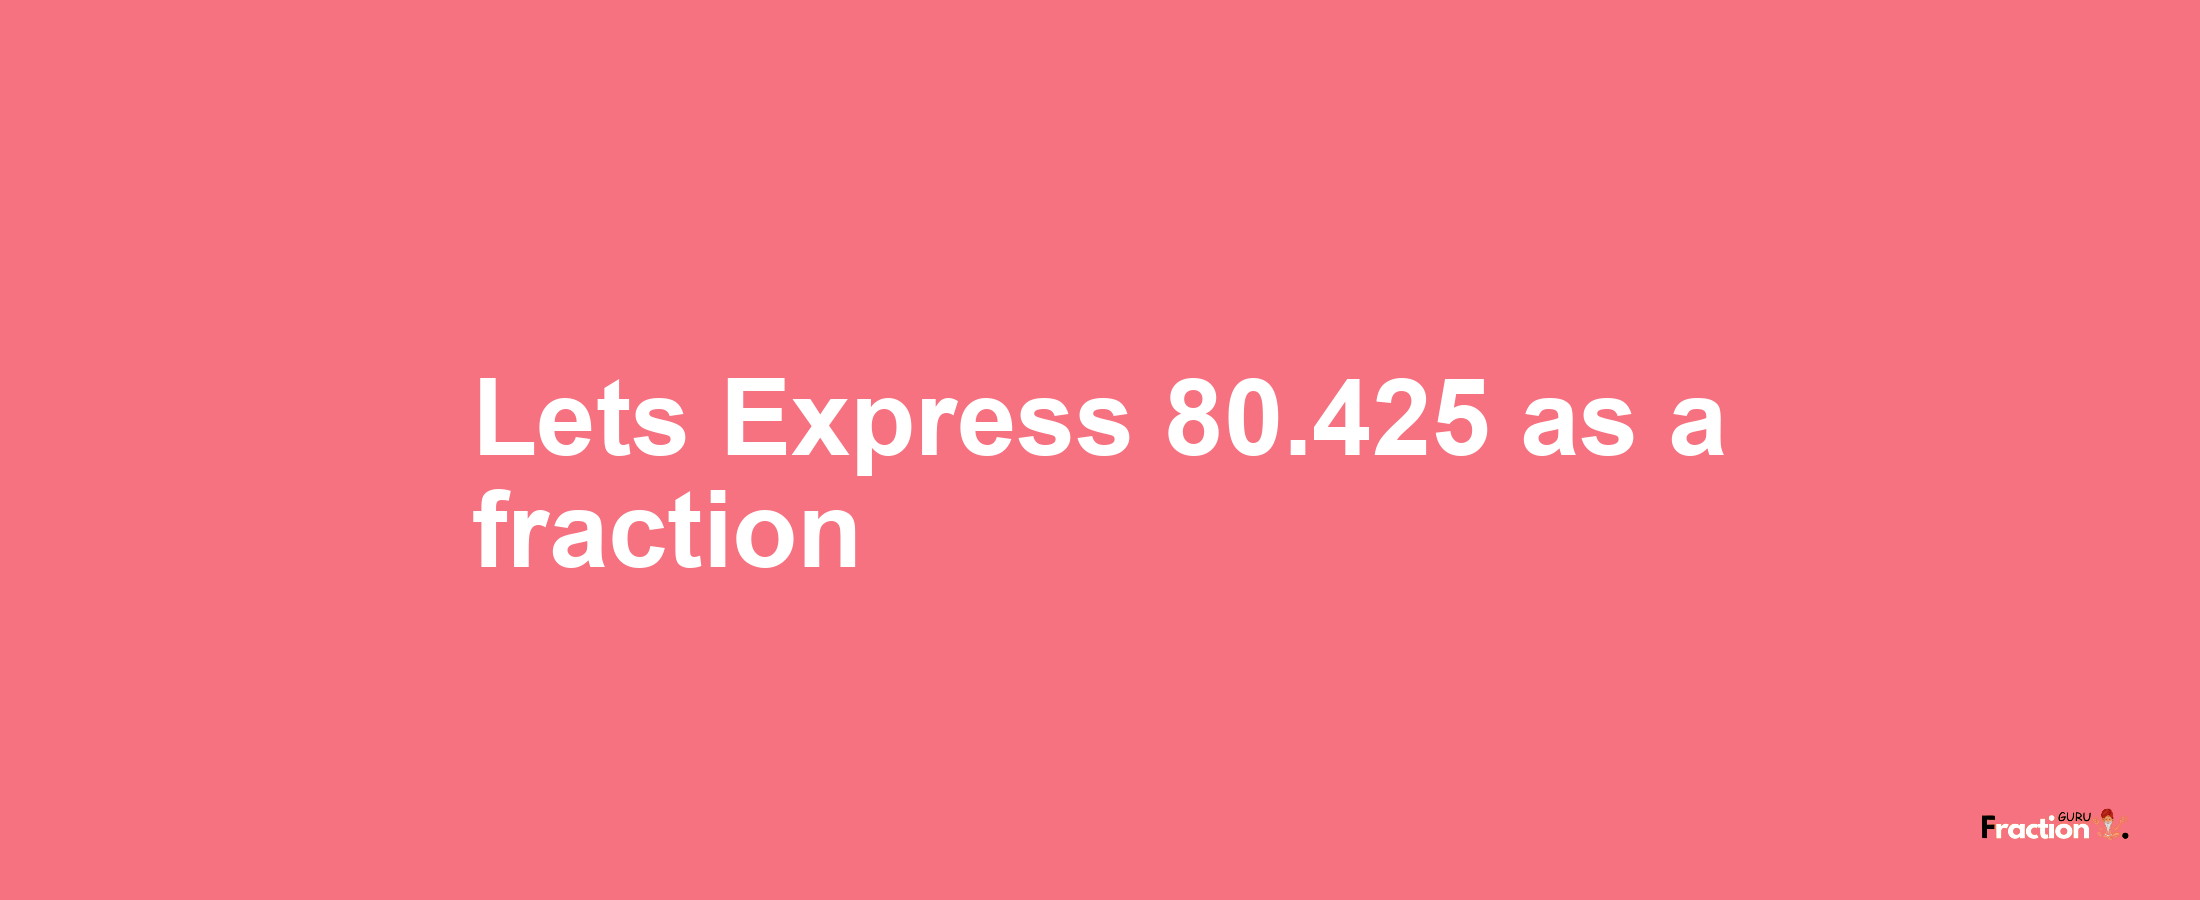 Lets Express 80.425 as afraction